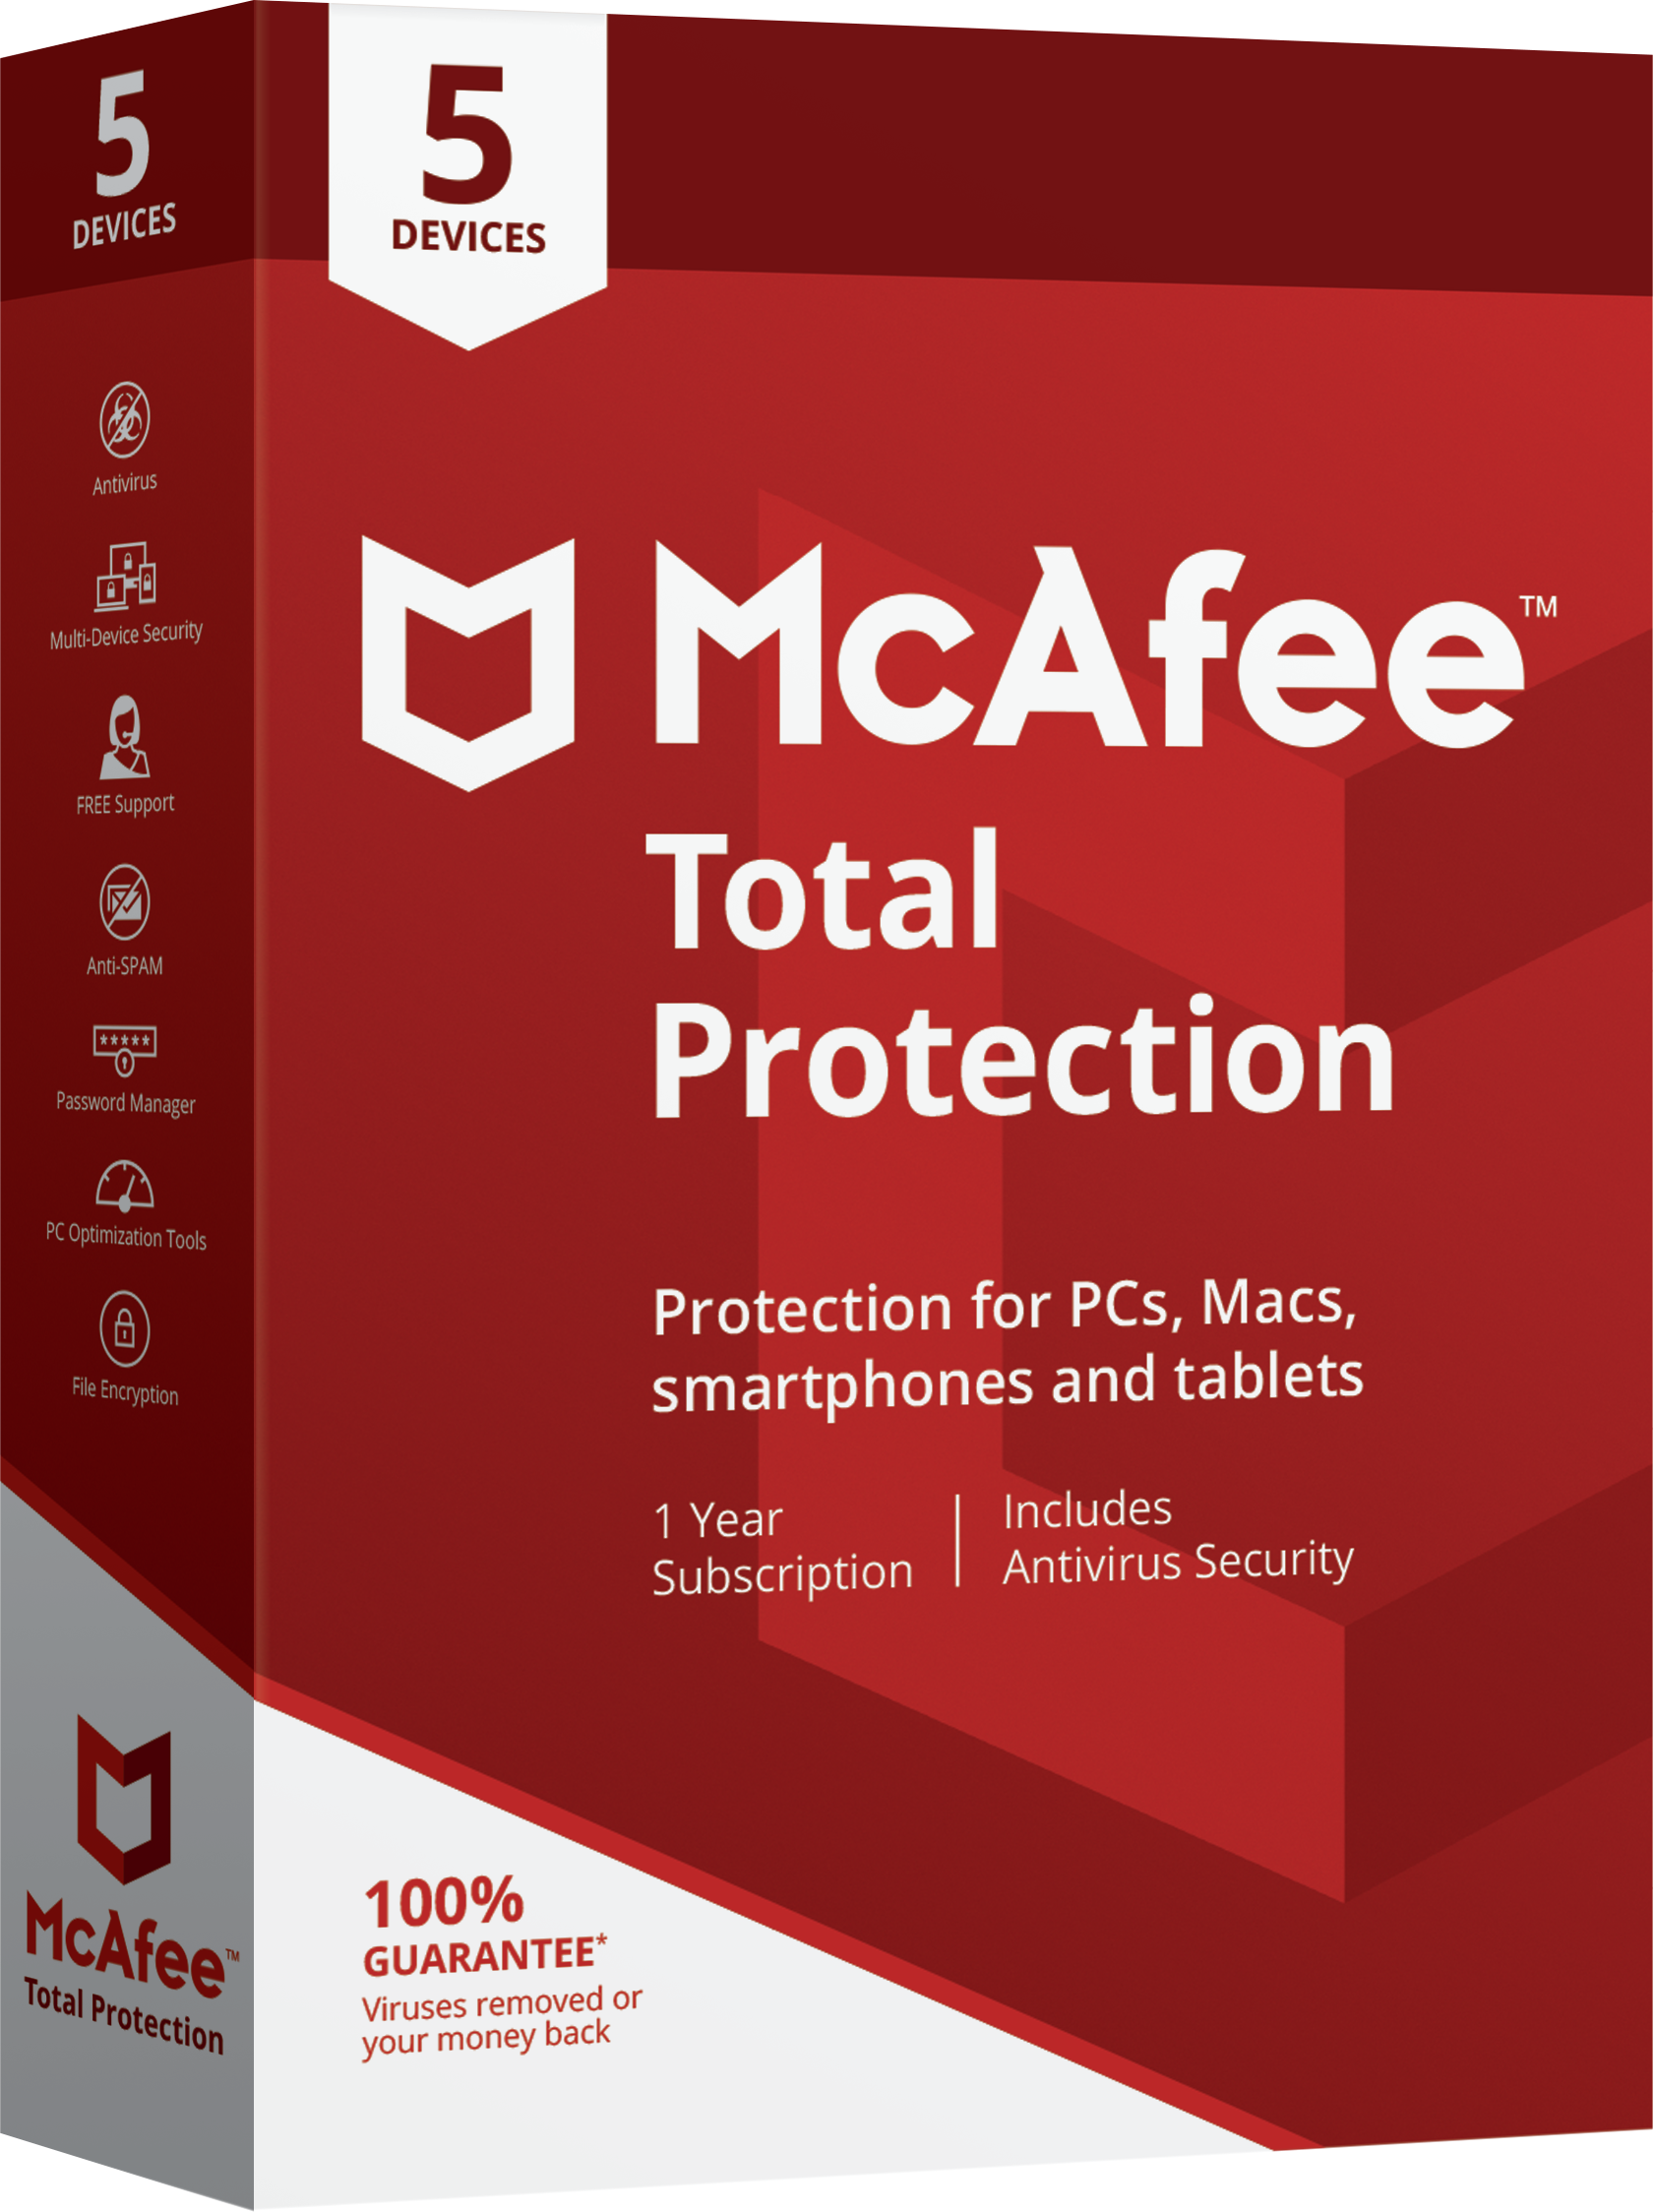  McAfee Total Protection for Mac